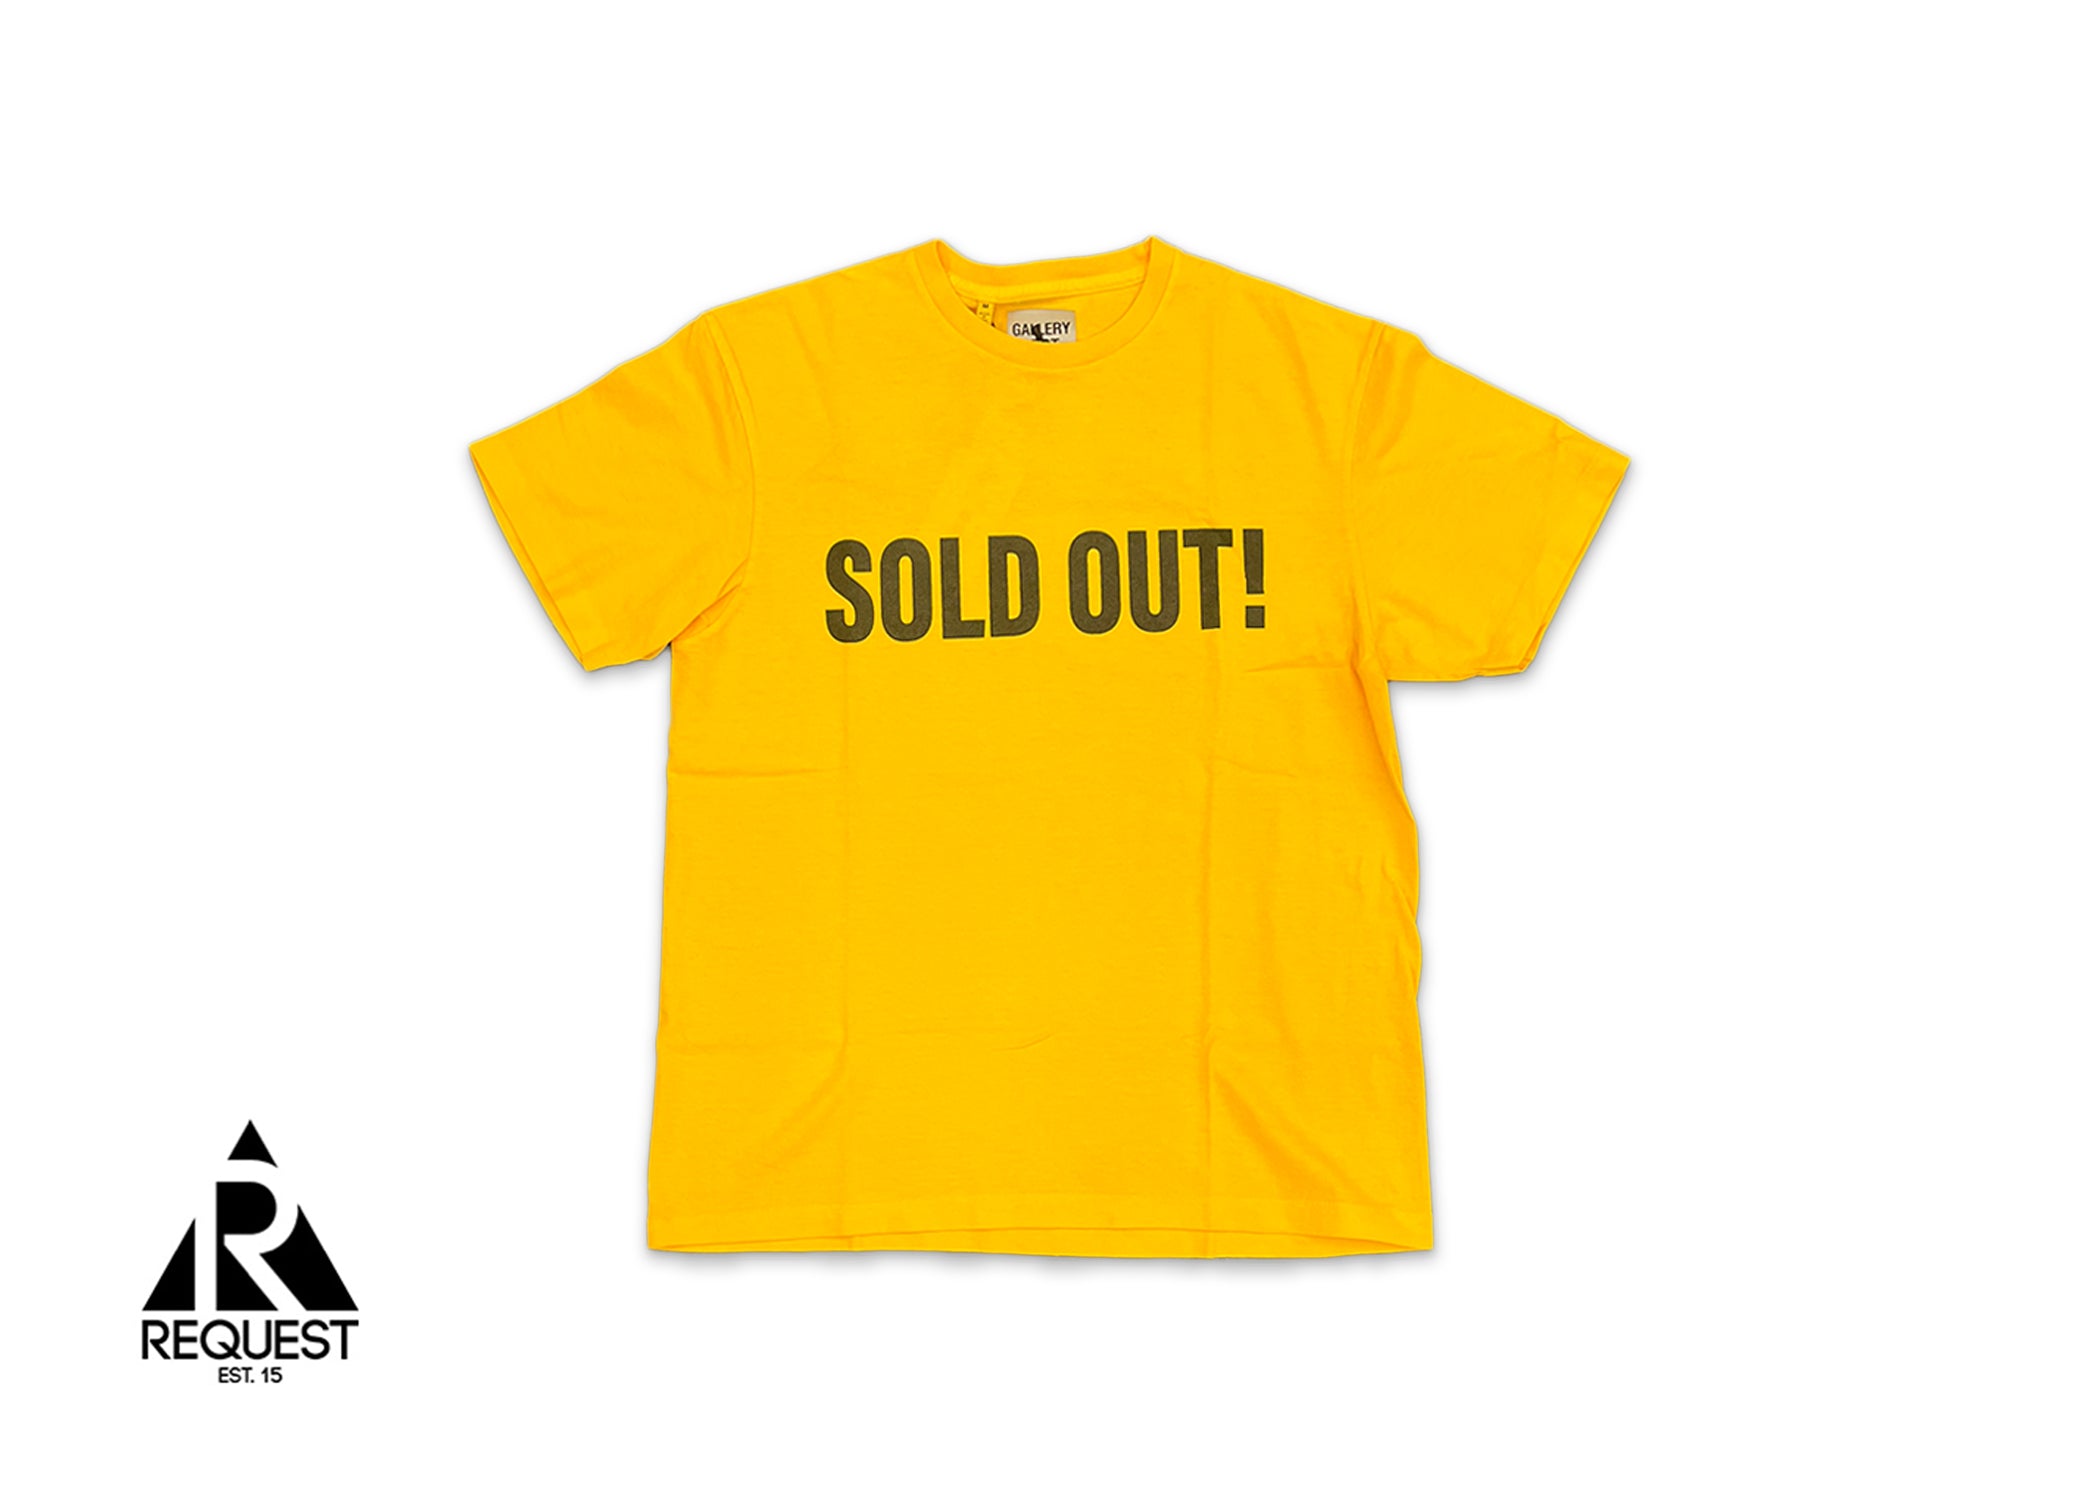 Gallery Dept. Sold Out Tee "Gold"